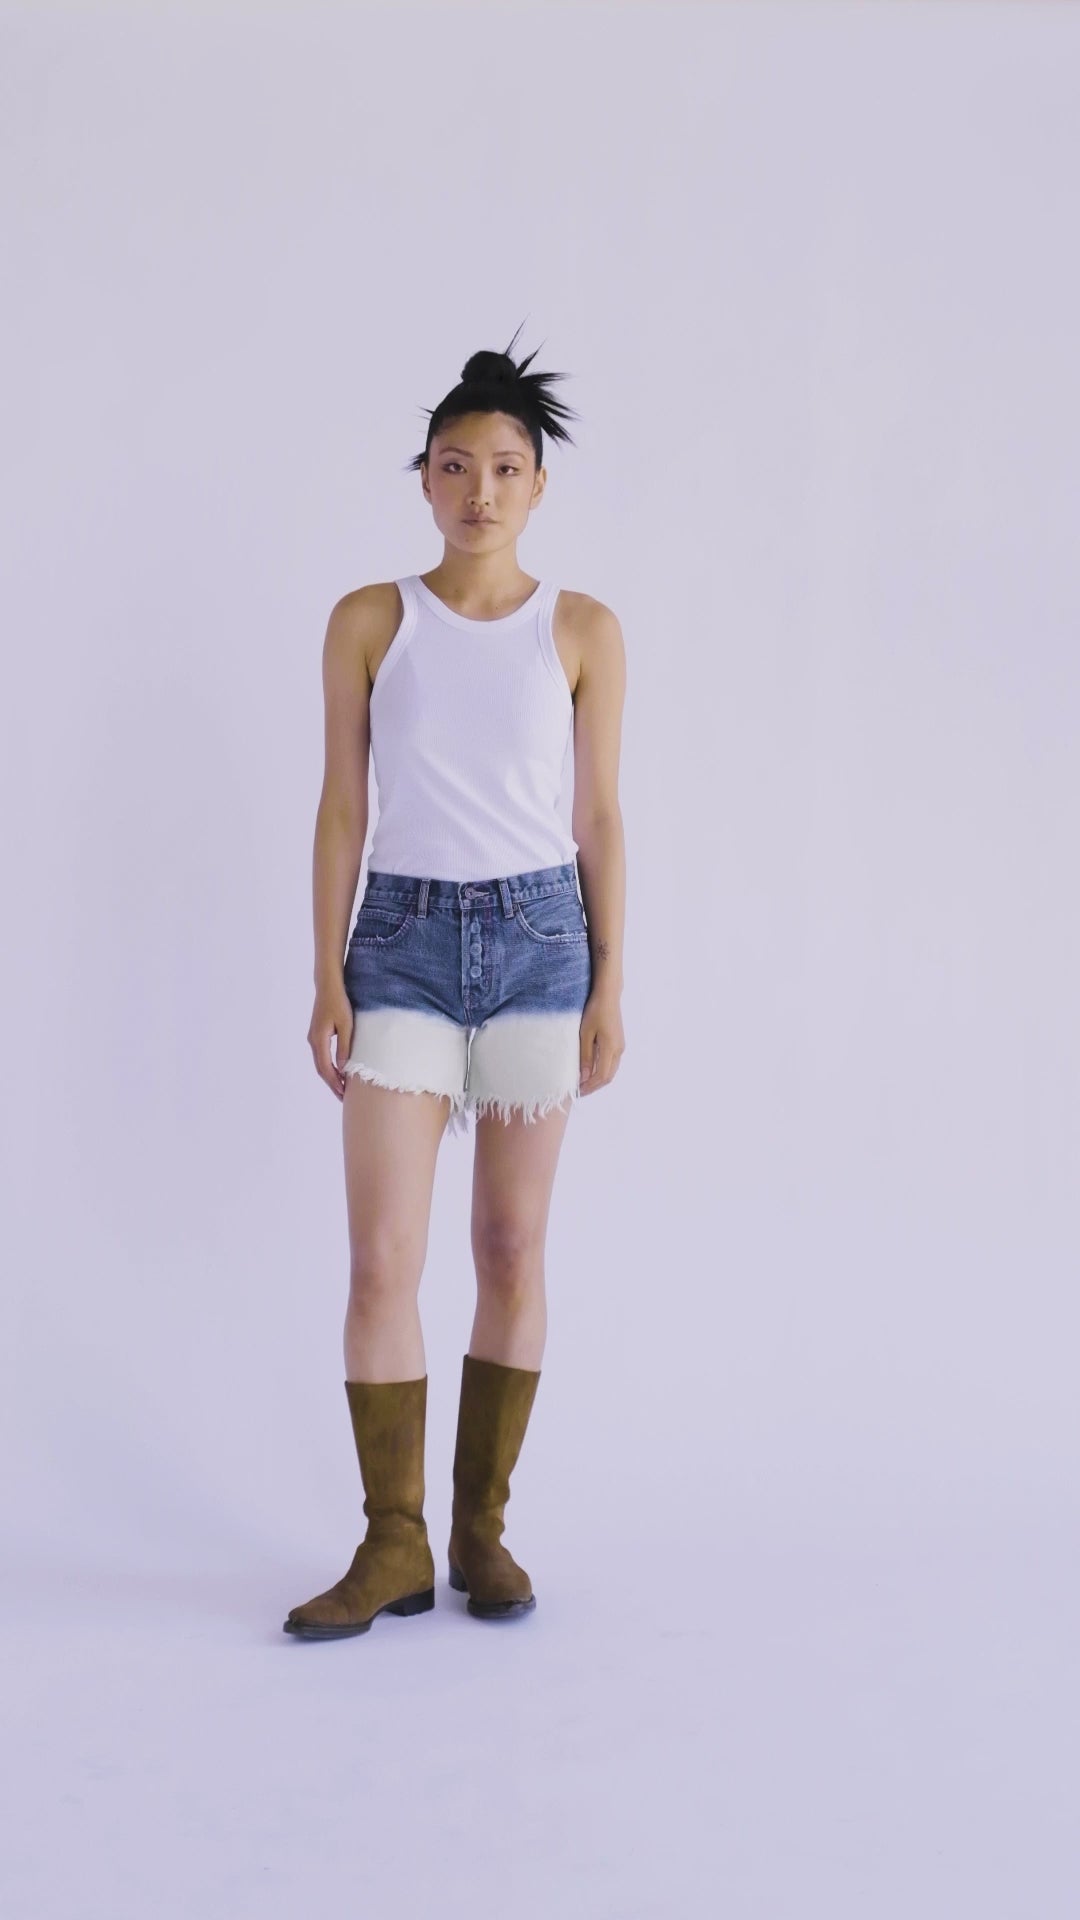 10-second video of a model presenting the B O R O デニム (BORO DENIM) 'Nagoya Let it Bleed' denim shorts. The model begins facing forward and rotates to showcase the shorts' unique 2-tone bleached ombre effect on Japanese Selvedge Fabric, from front to back